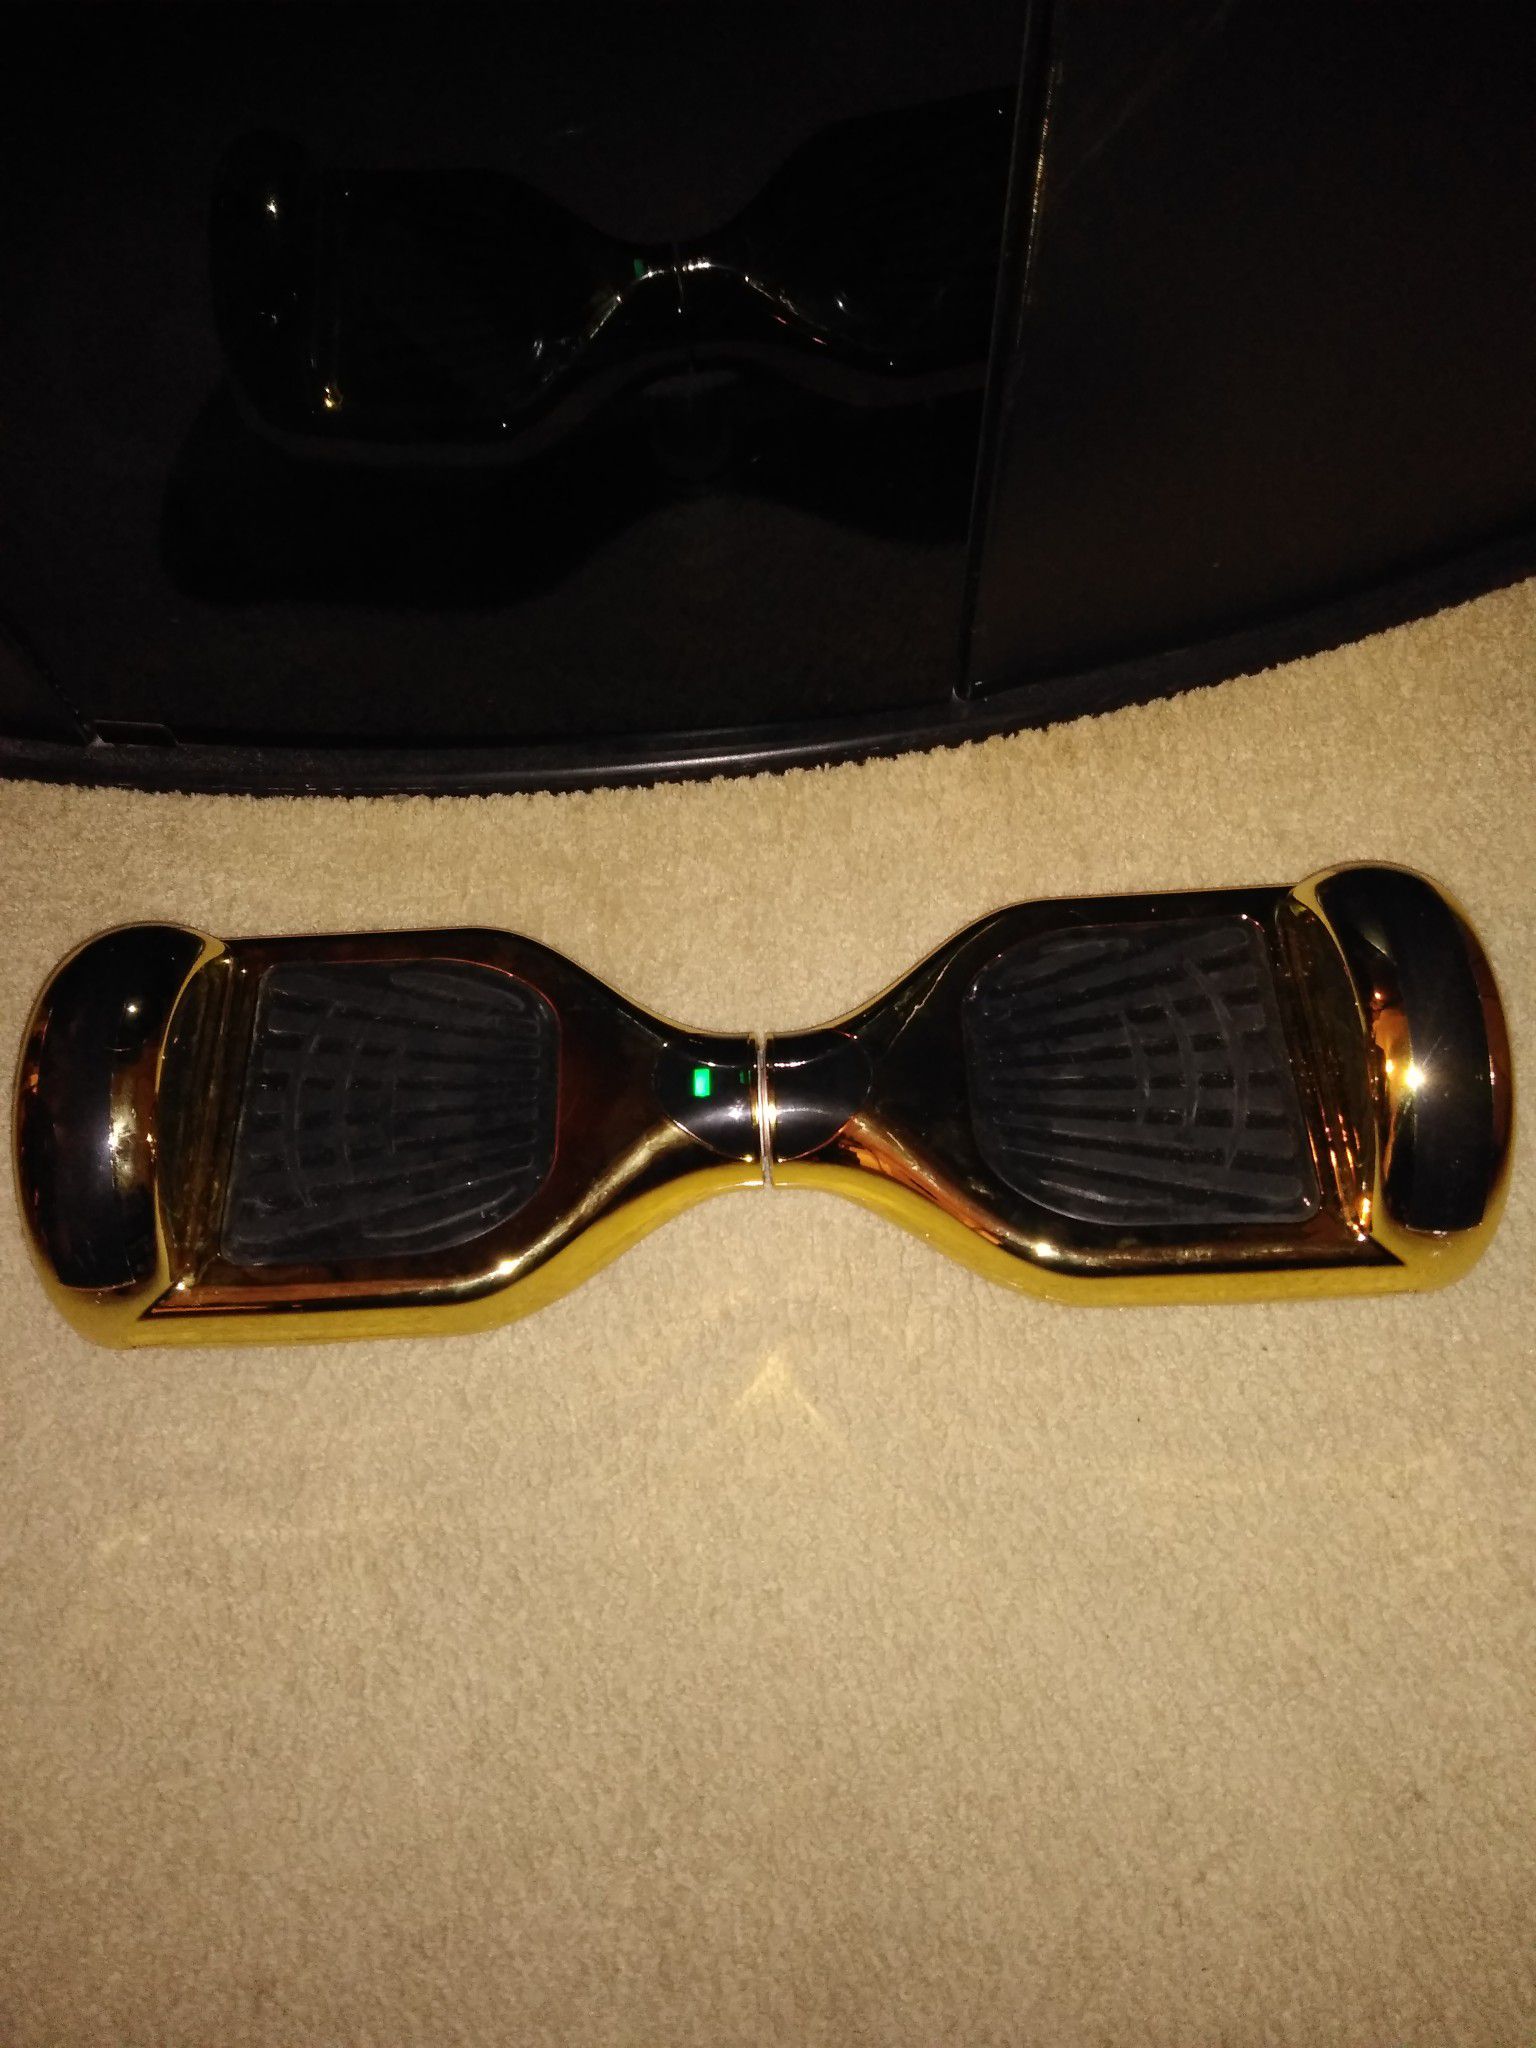 Lbw04 Bluetooth hoverboard